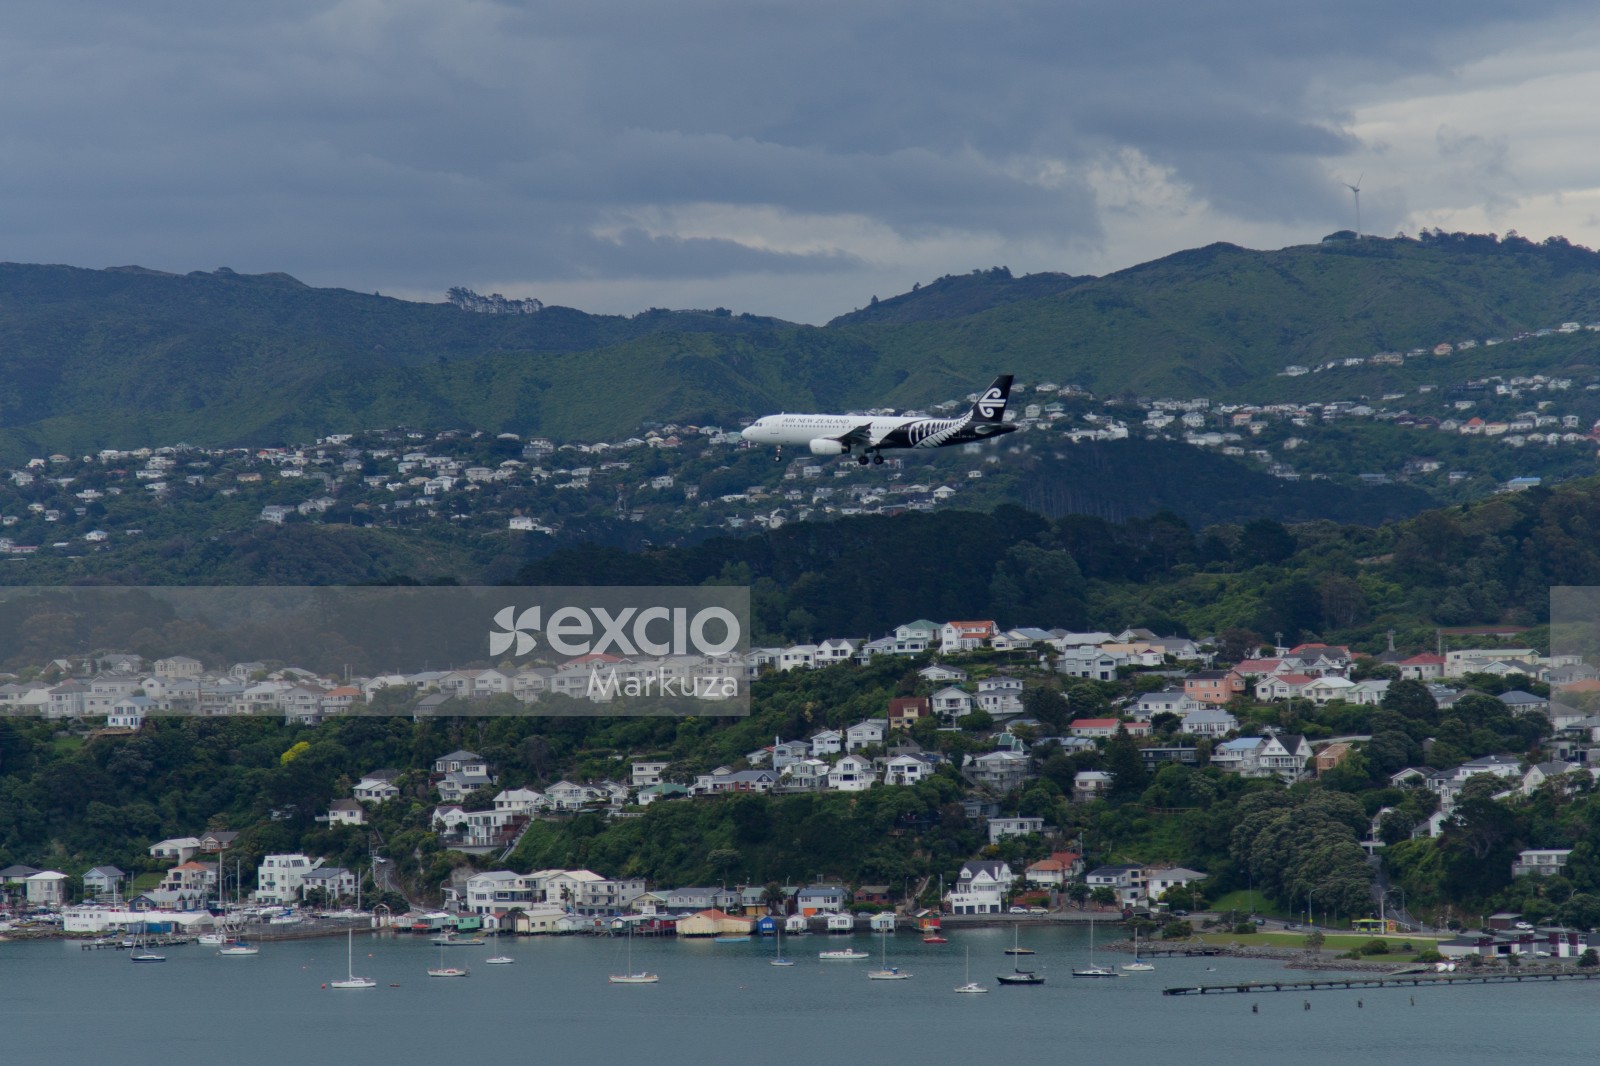 AIR New Zealand plane over the town